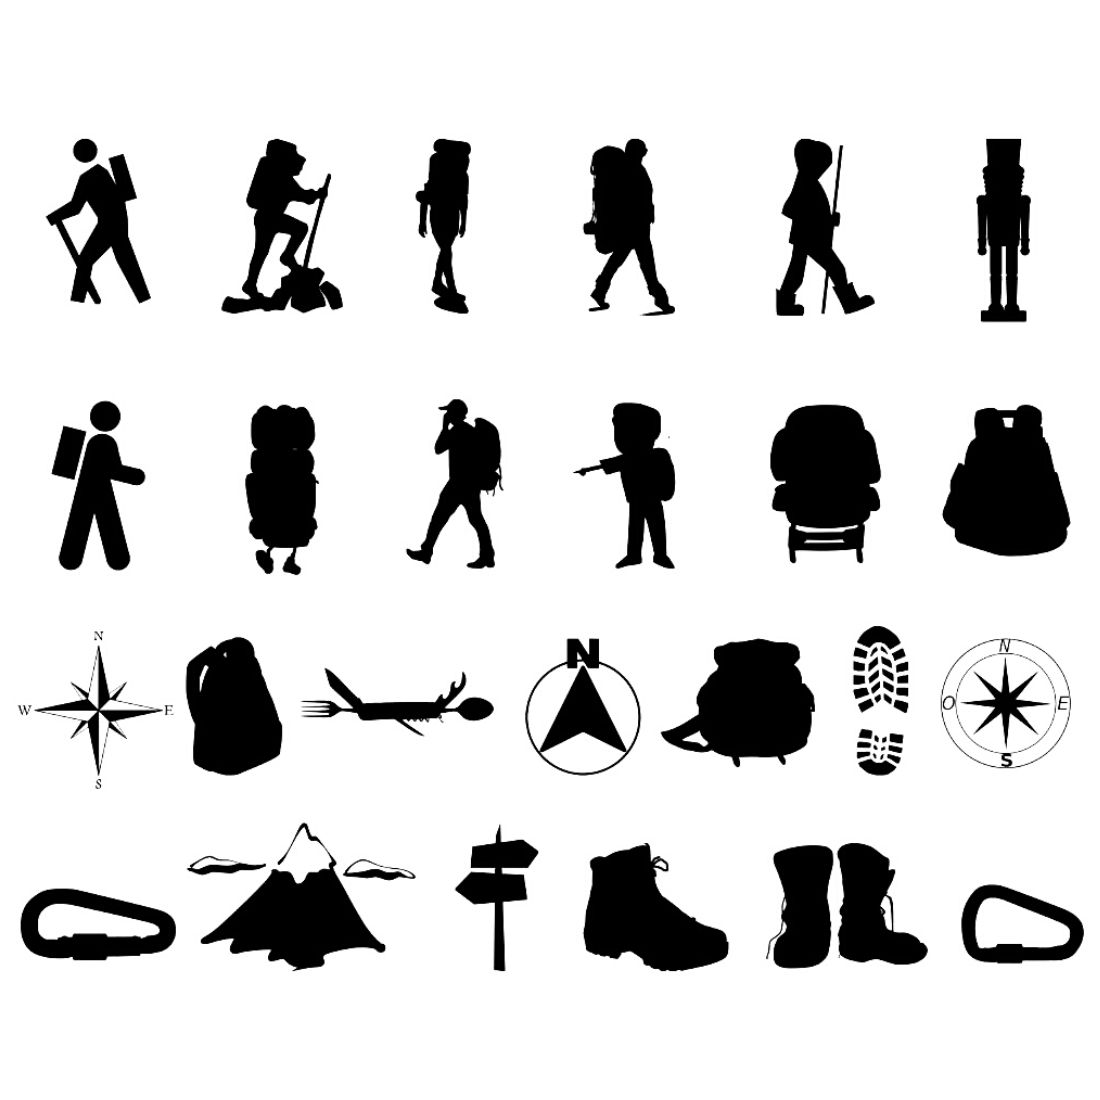 Hiking Silhouette Bundles cover image.